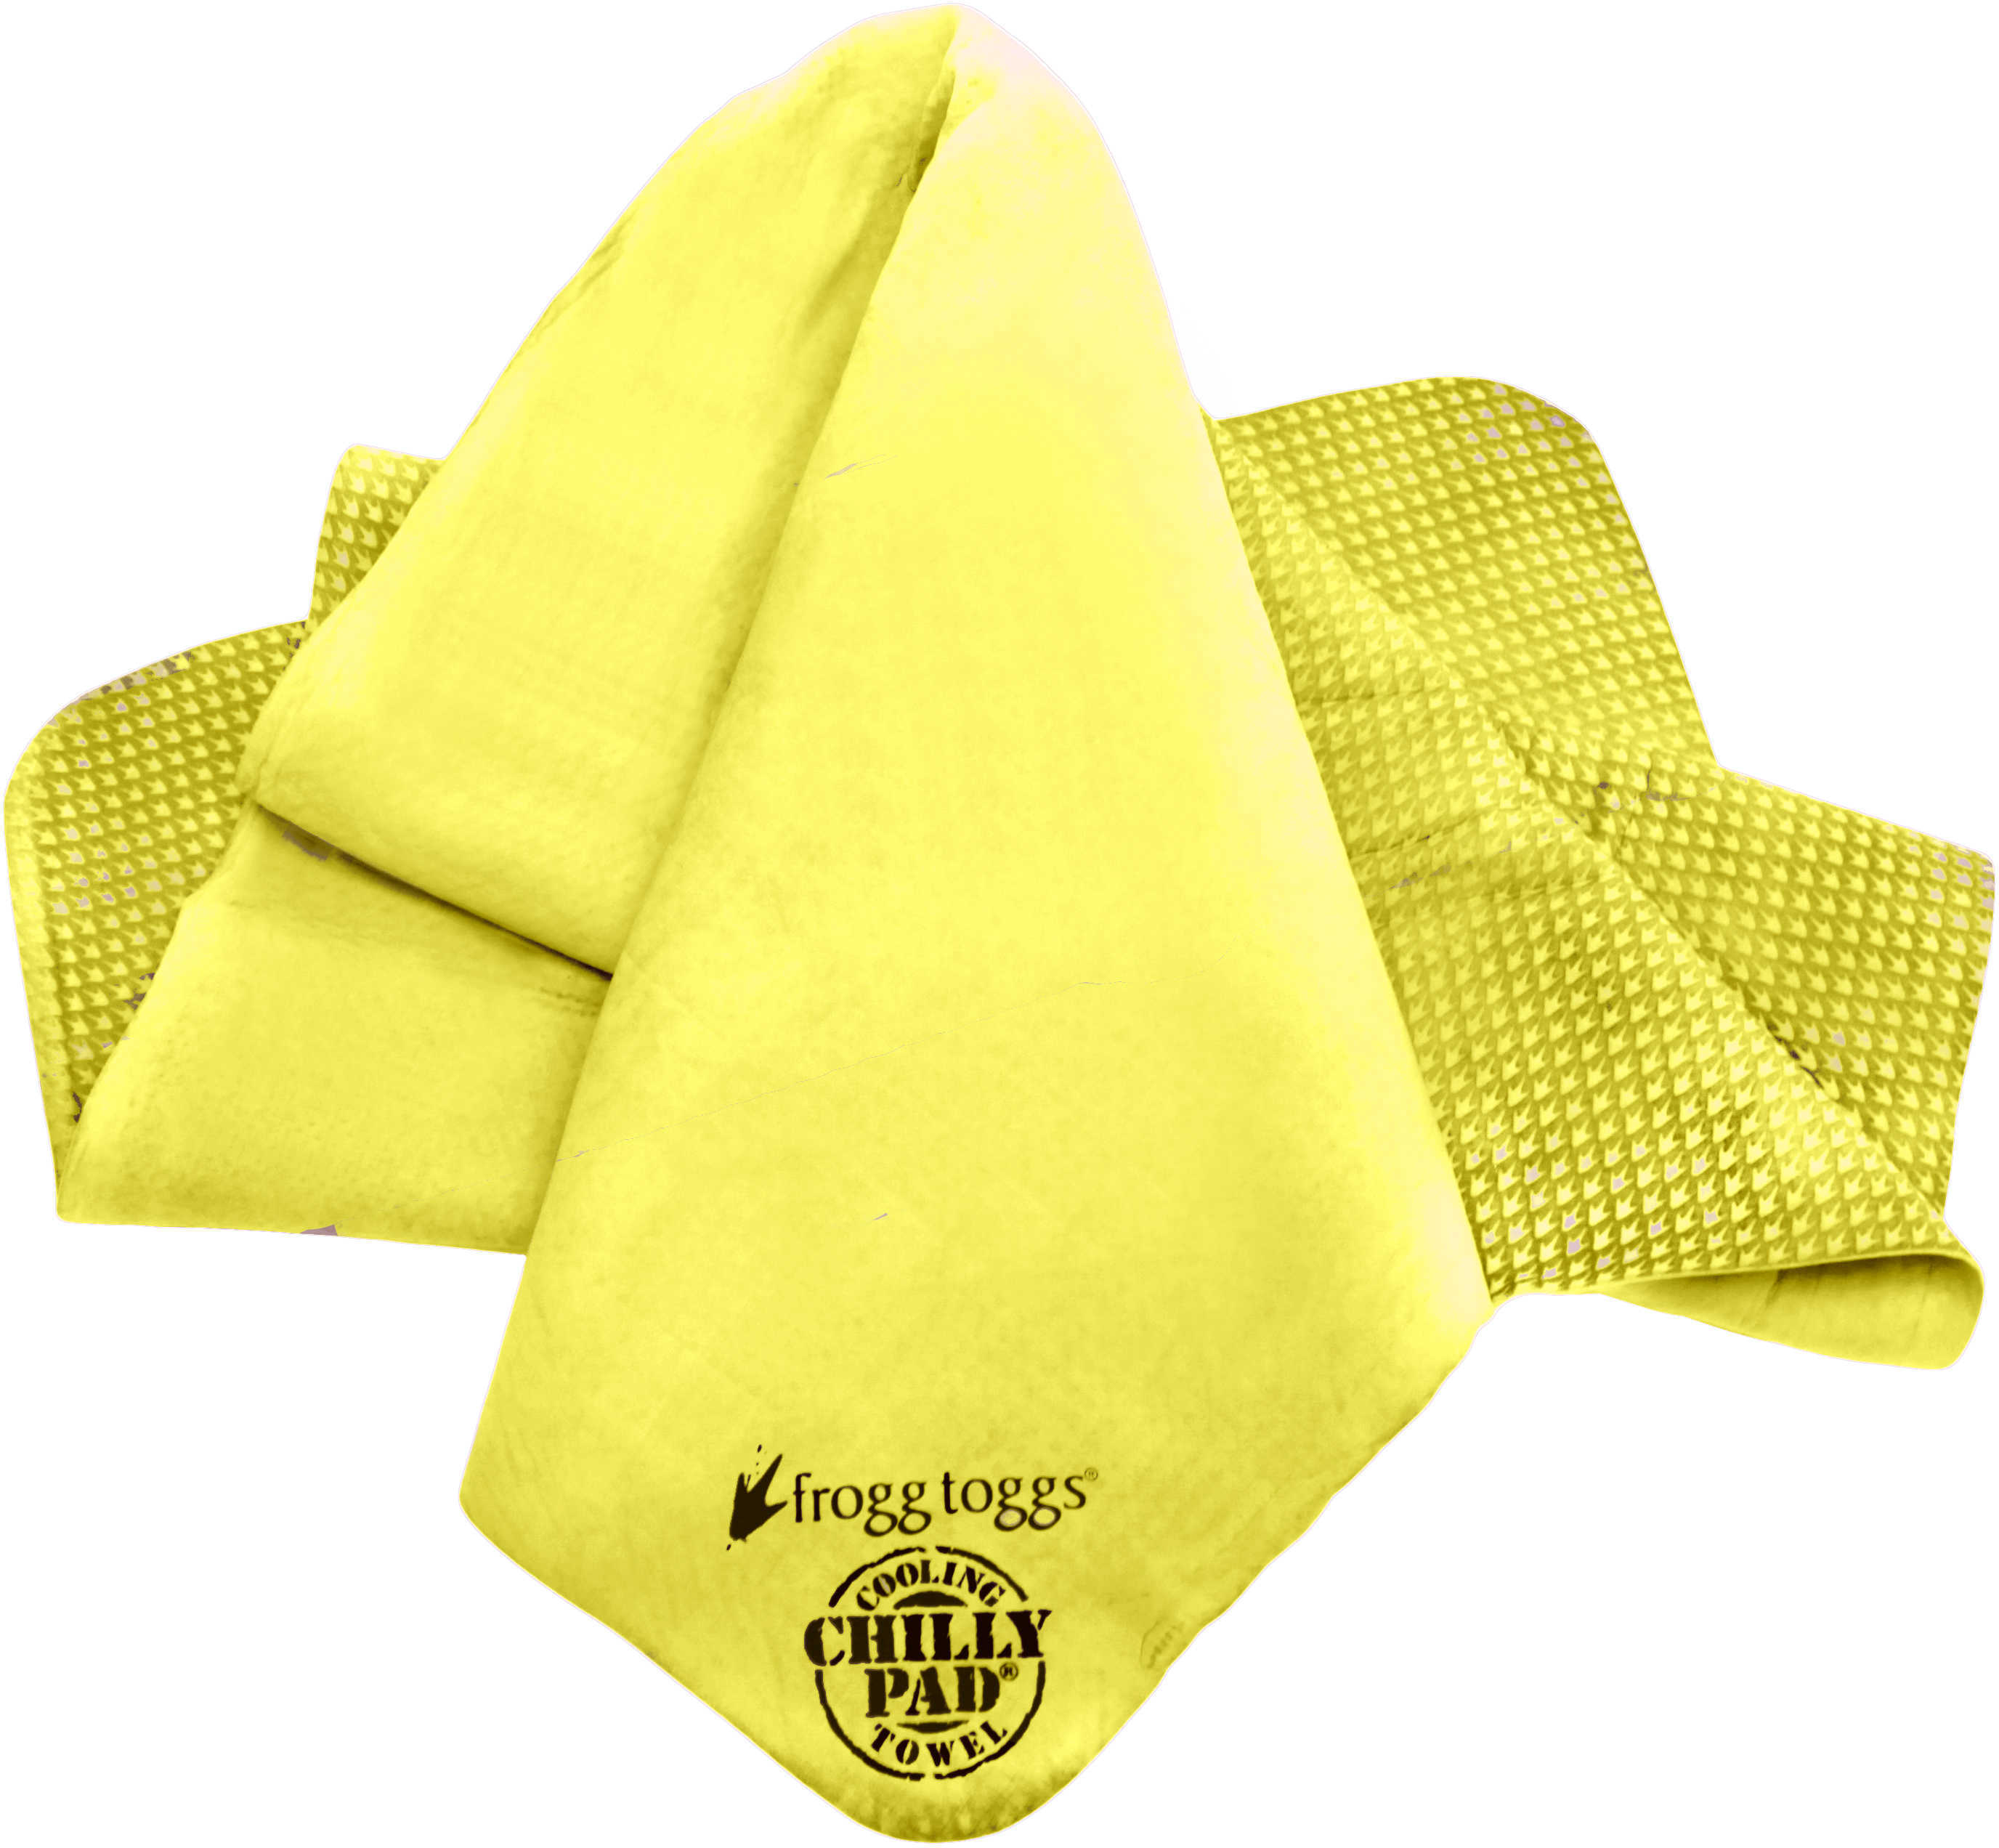 Frogg Toggs Chilly Pad Towel Yellow Model: CP-100-47